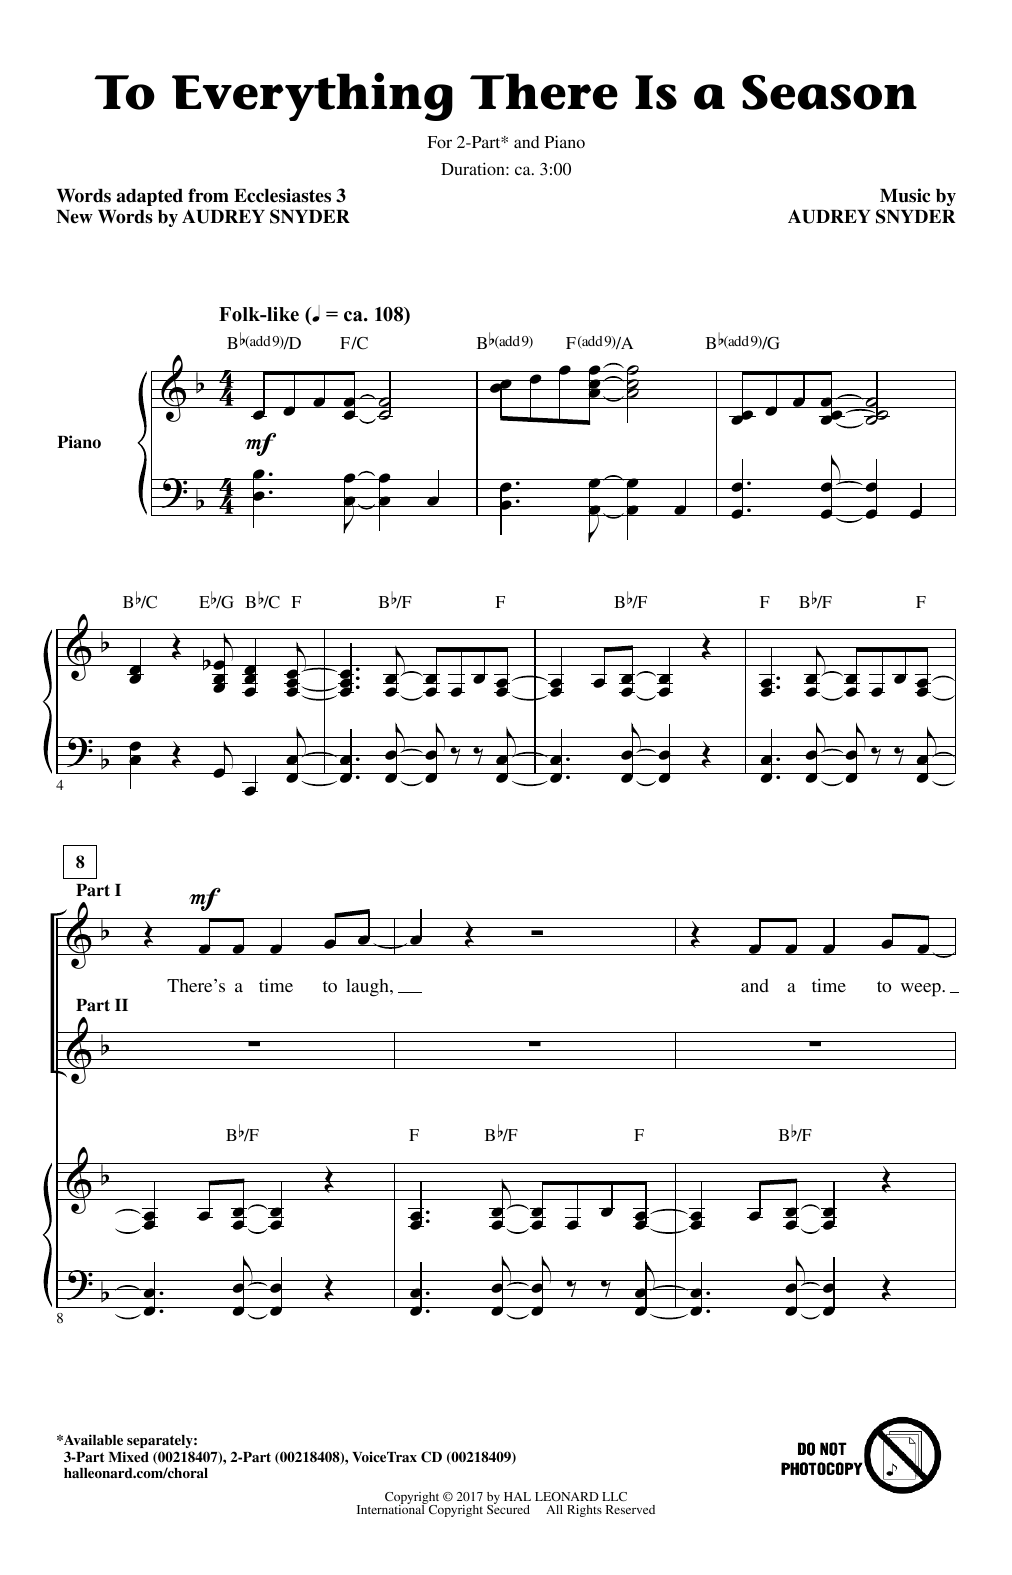 Audrey Snyder To Everything There Is A Season sheet music notes and chords. Download Printable PDF.